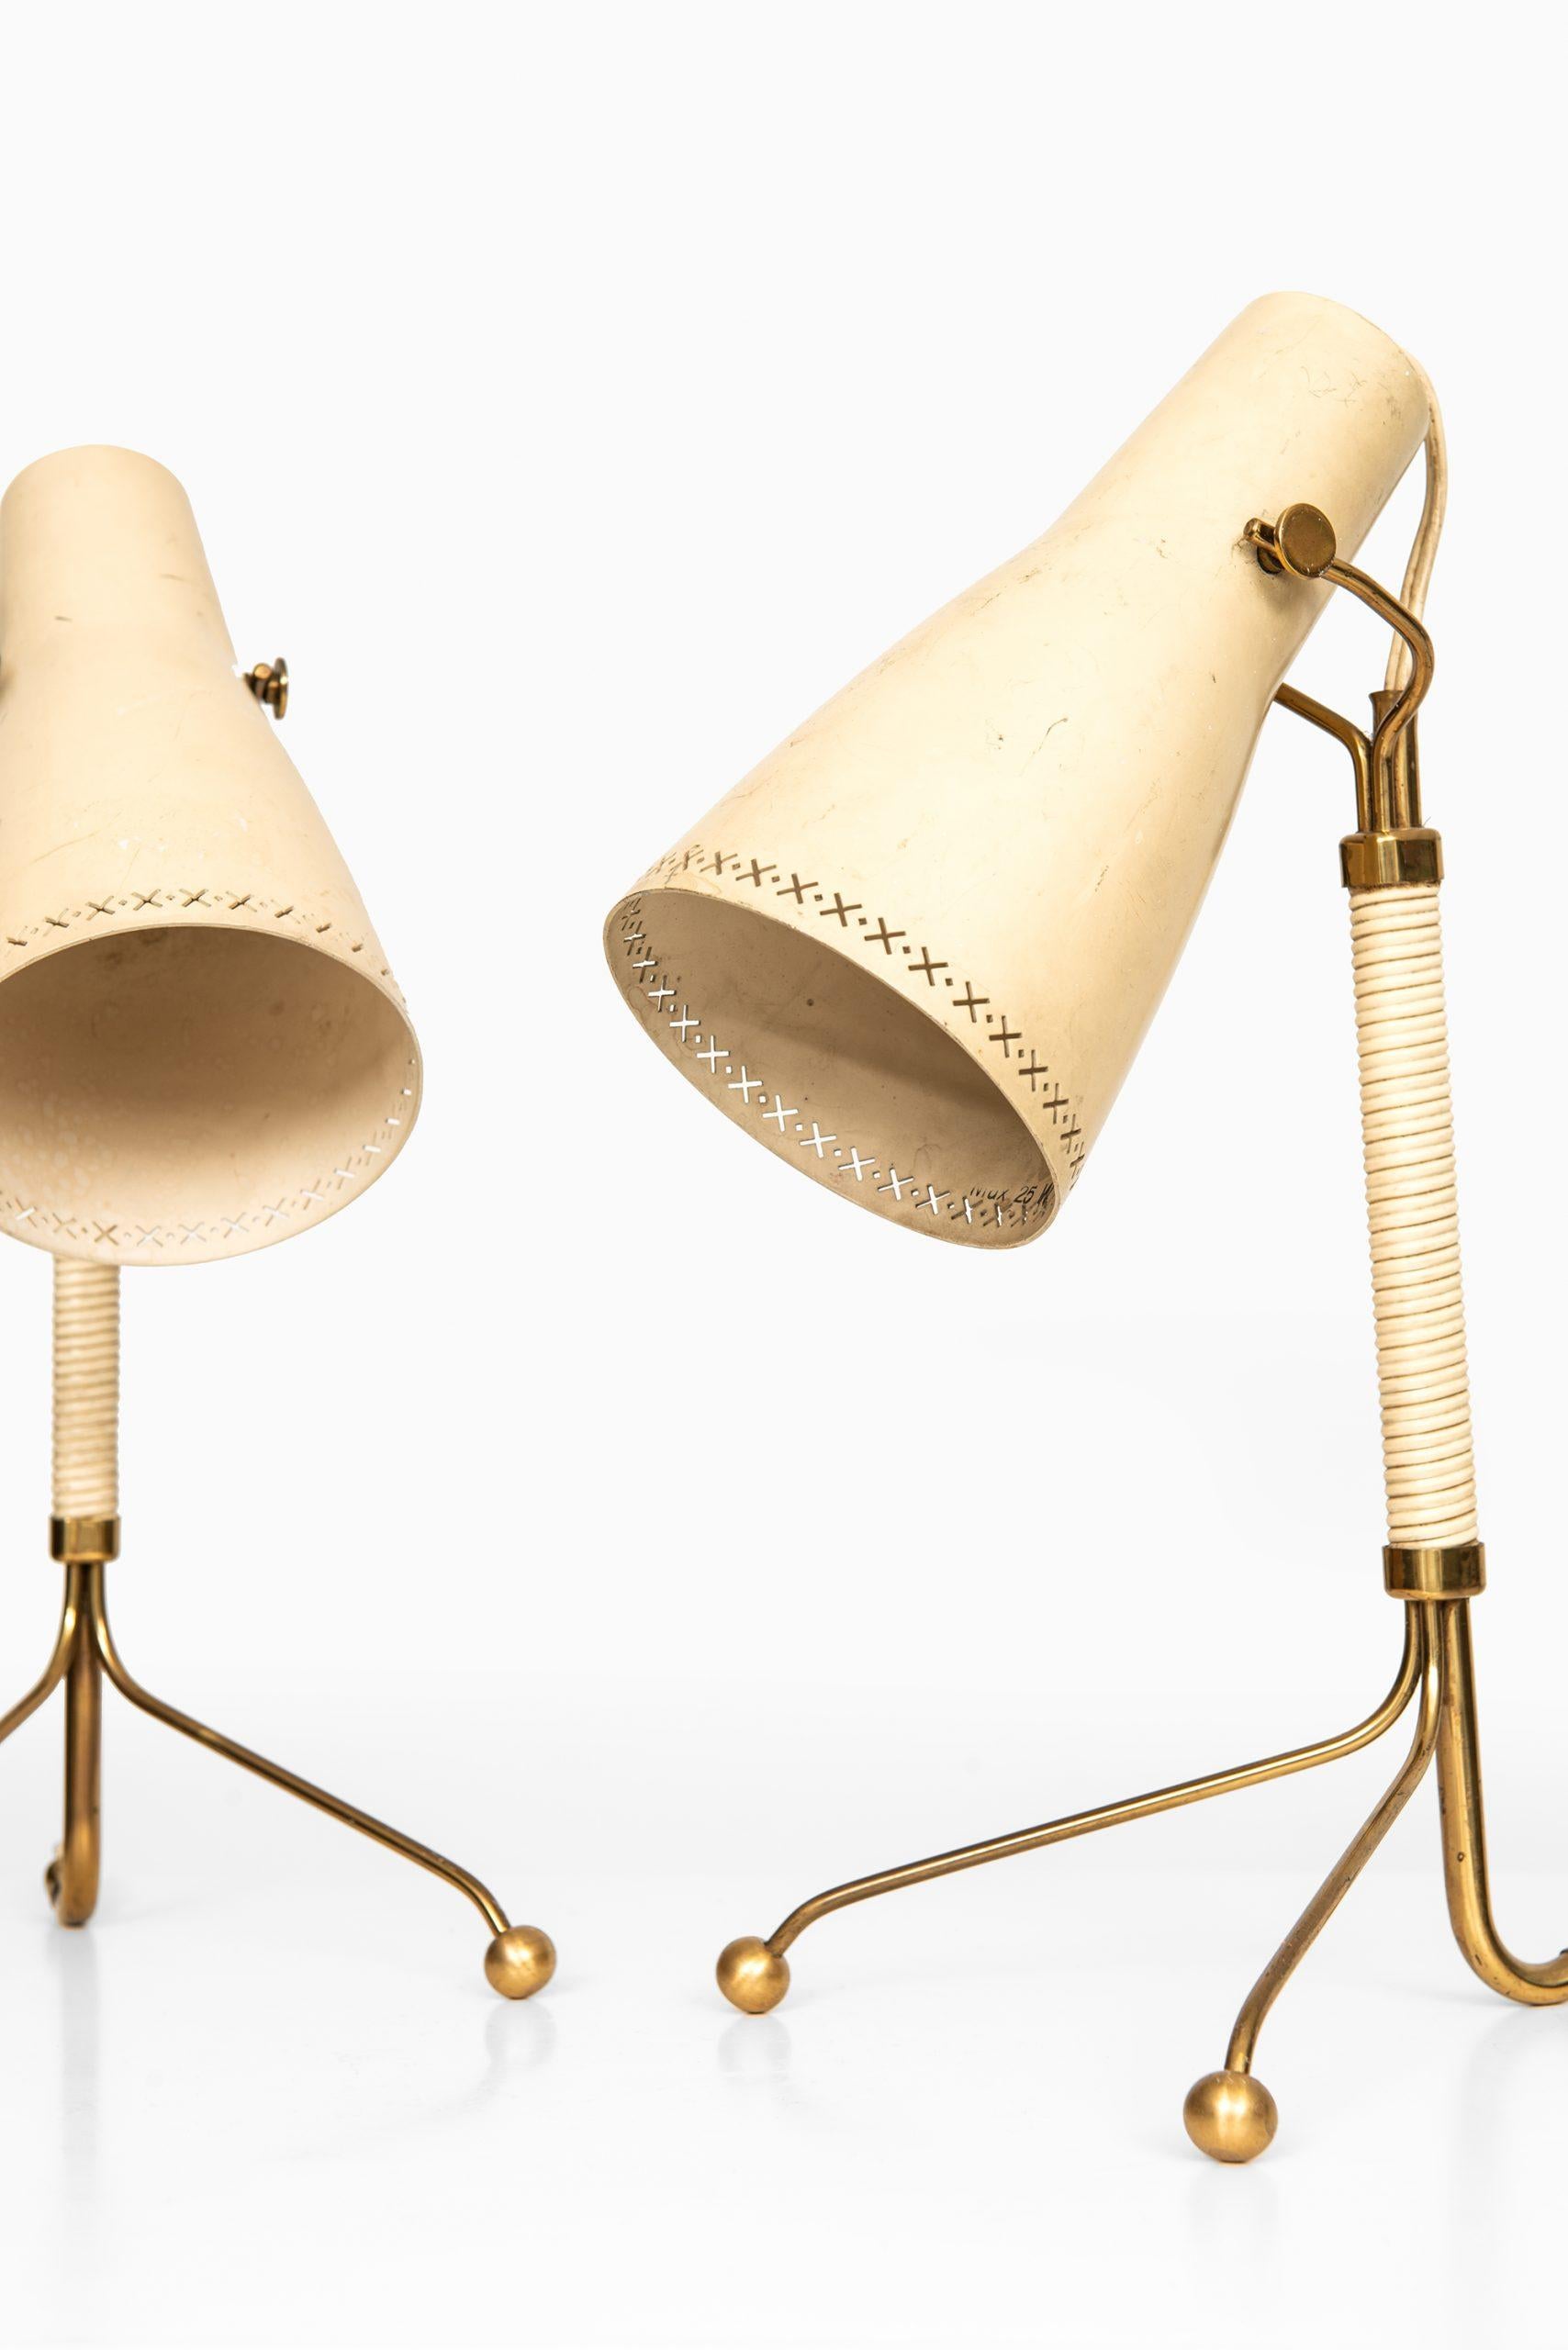 Rare pair of table lamps attributed to Hans Bergström. Produced by ASEA in Sweden.